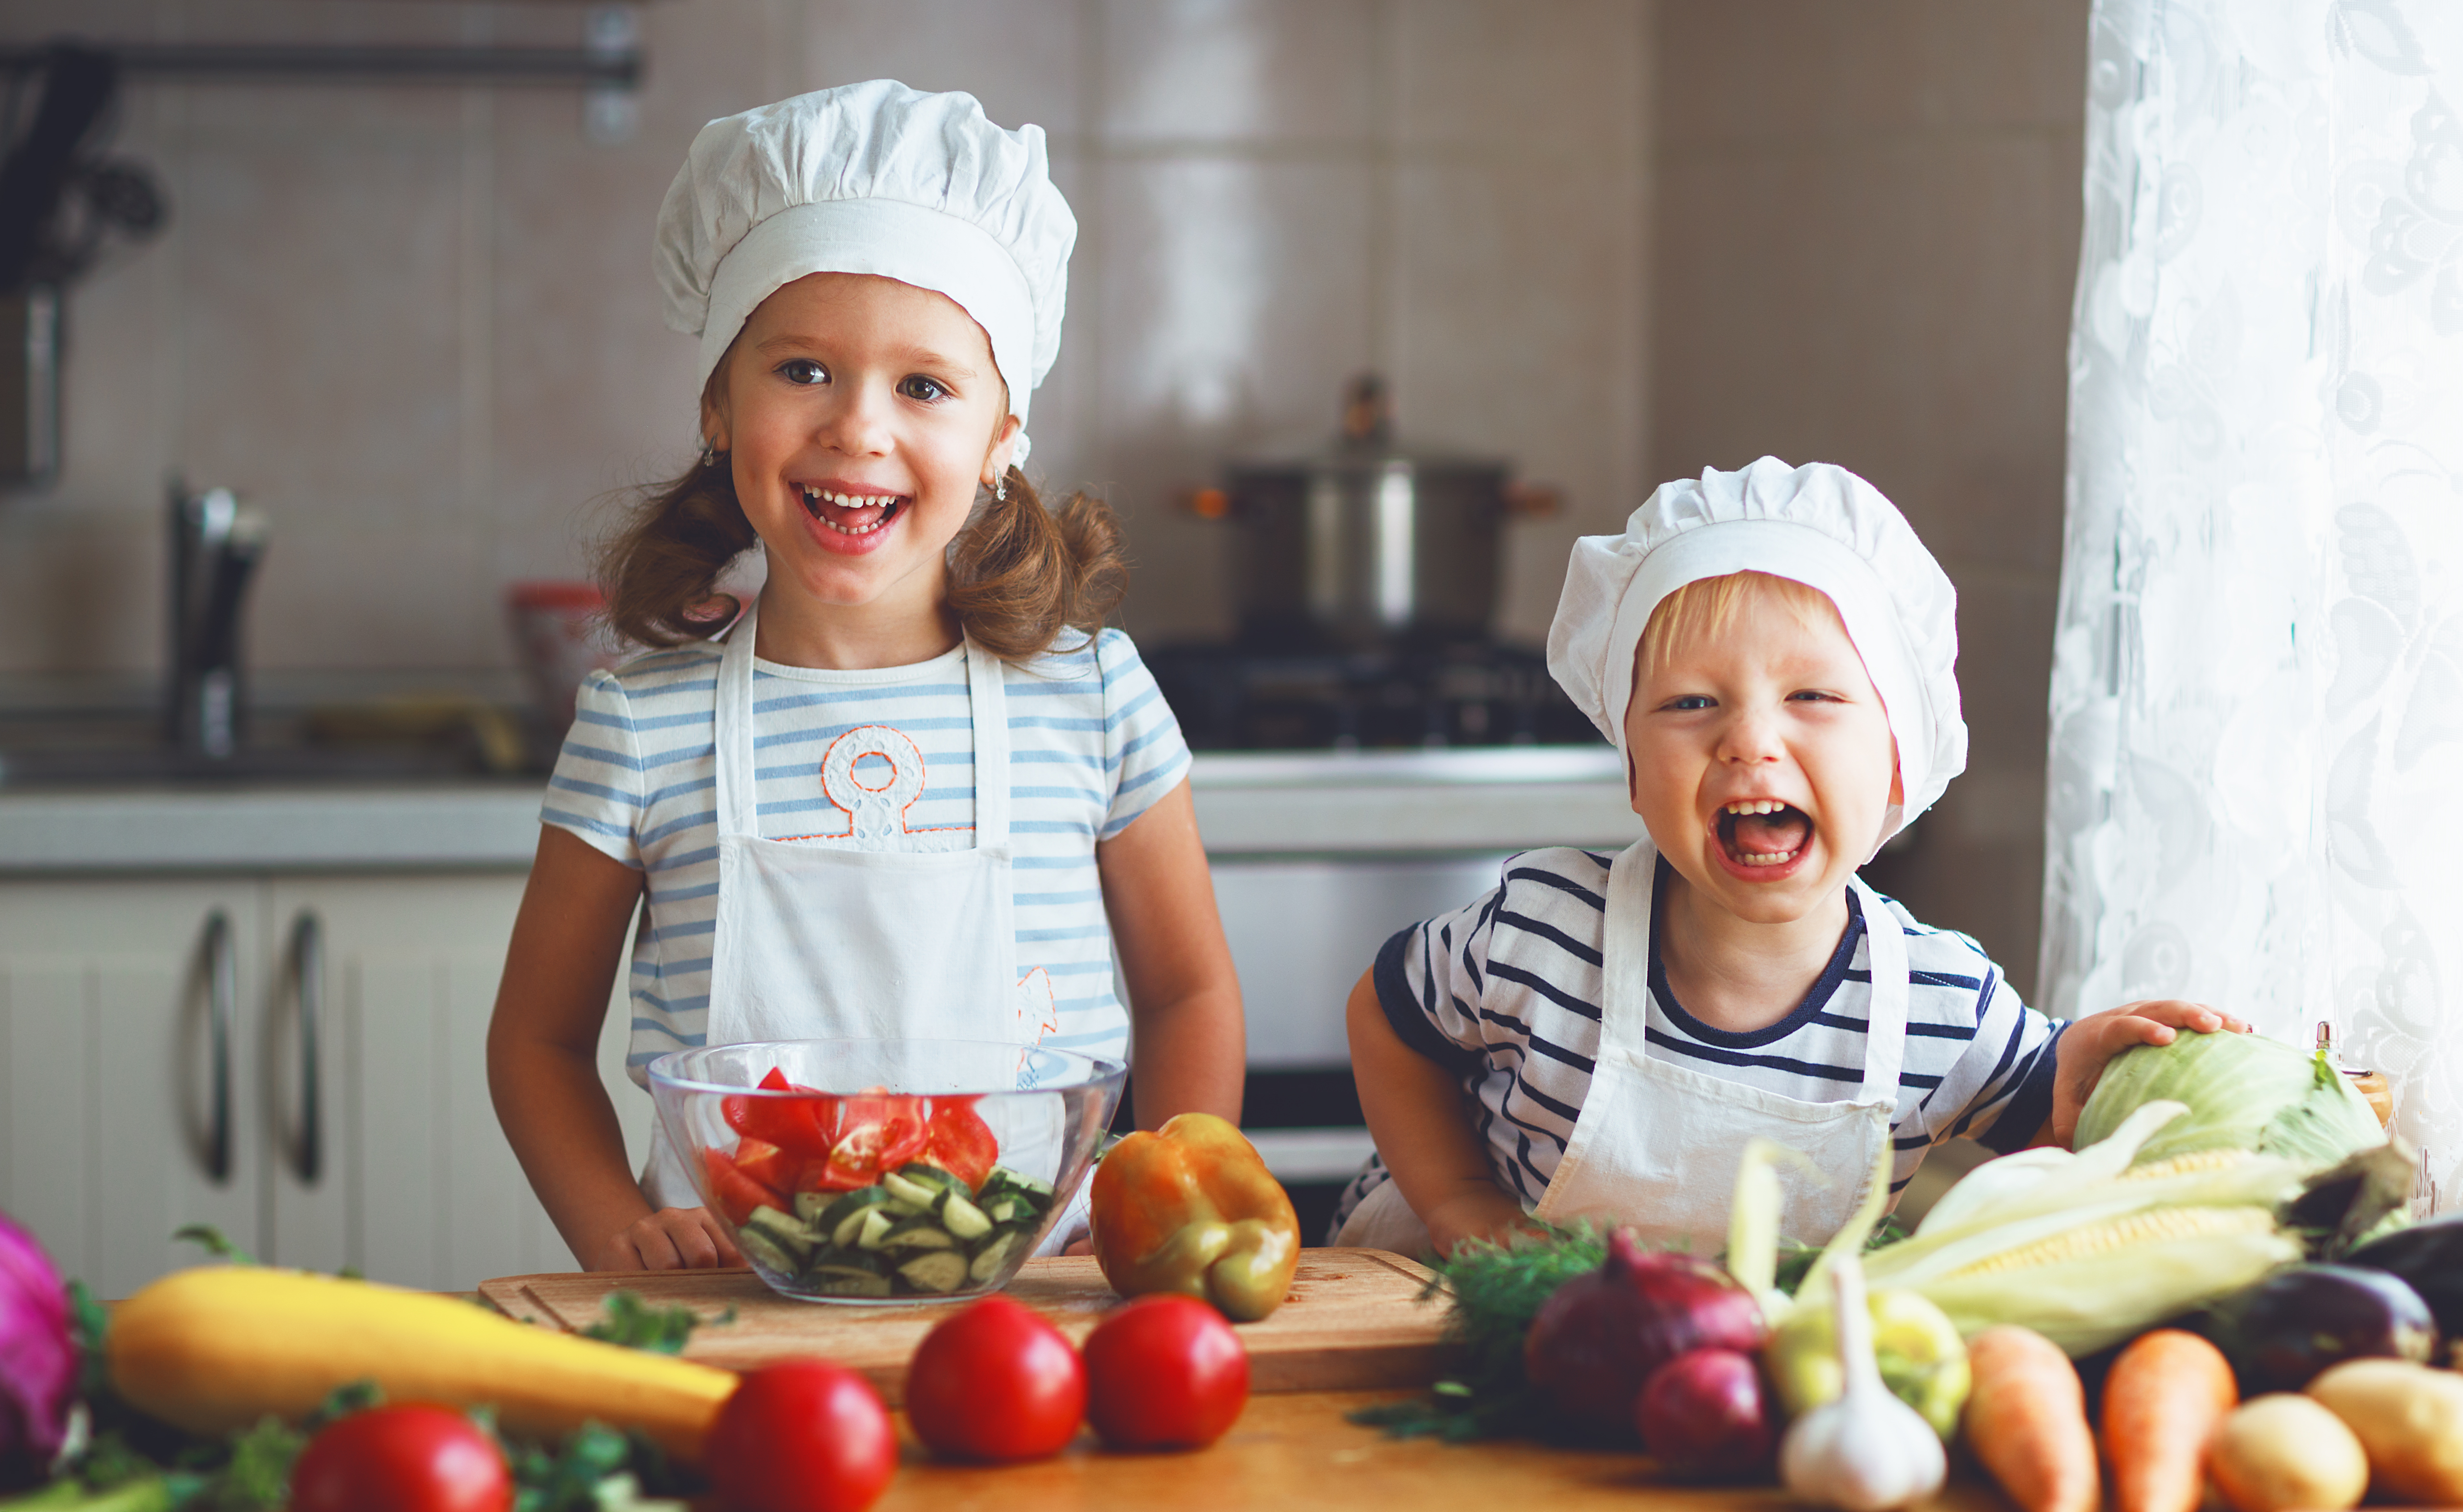 Children cooking with healthy foods